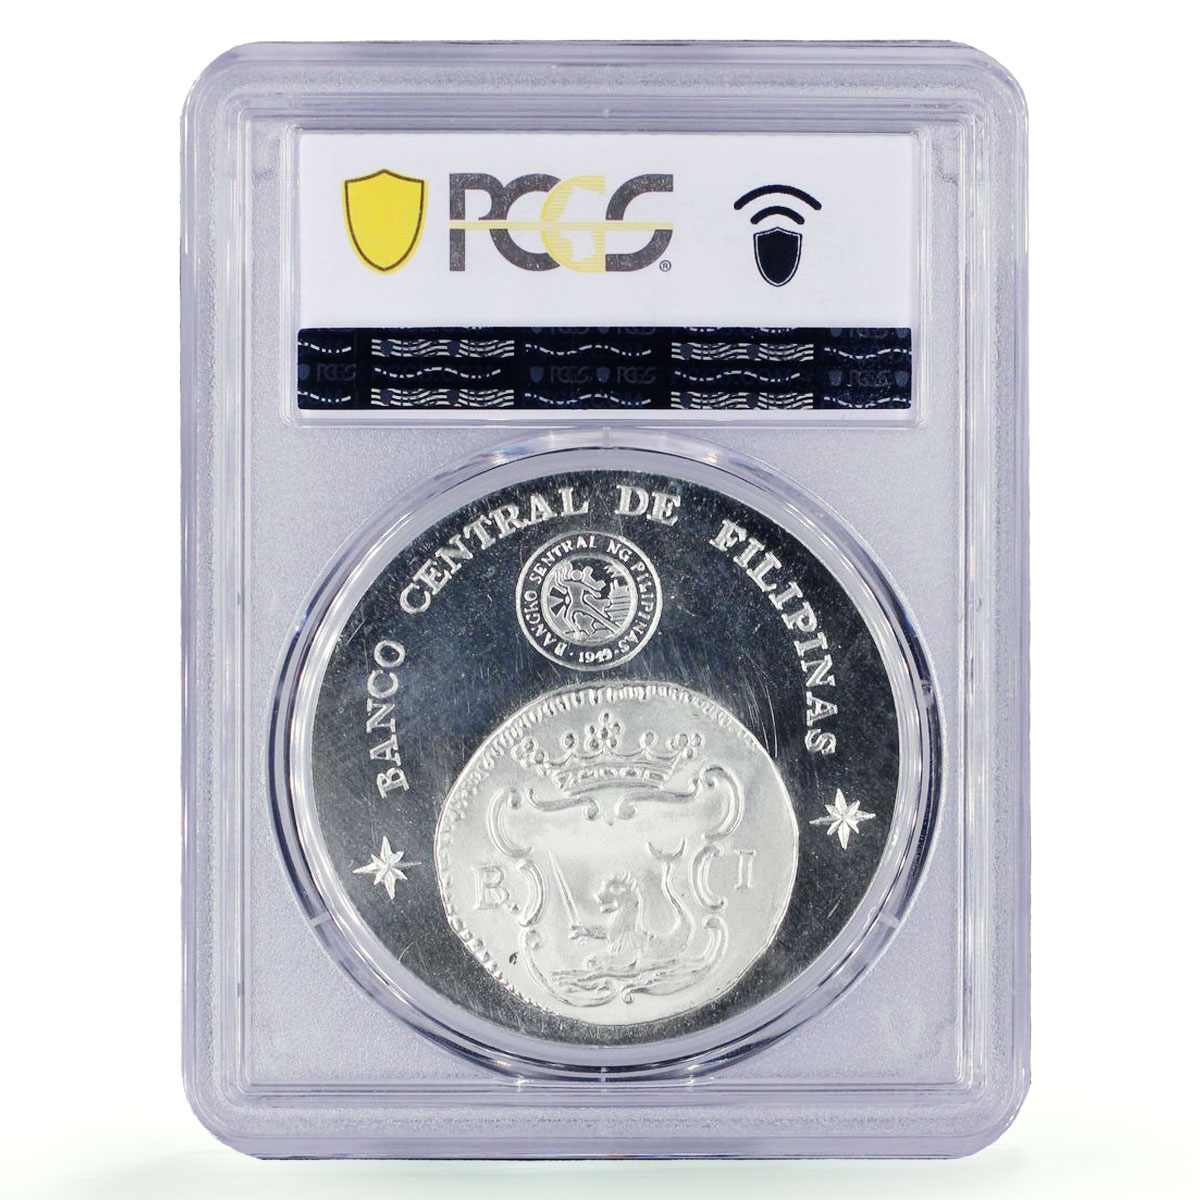 Philippines Numismatic Expo in Spain Barilla Coin SP66 PCGS silver medal 1979